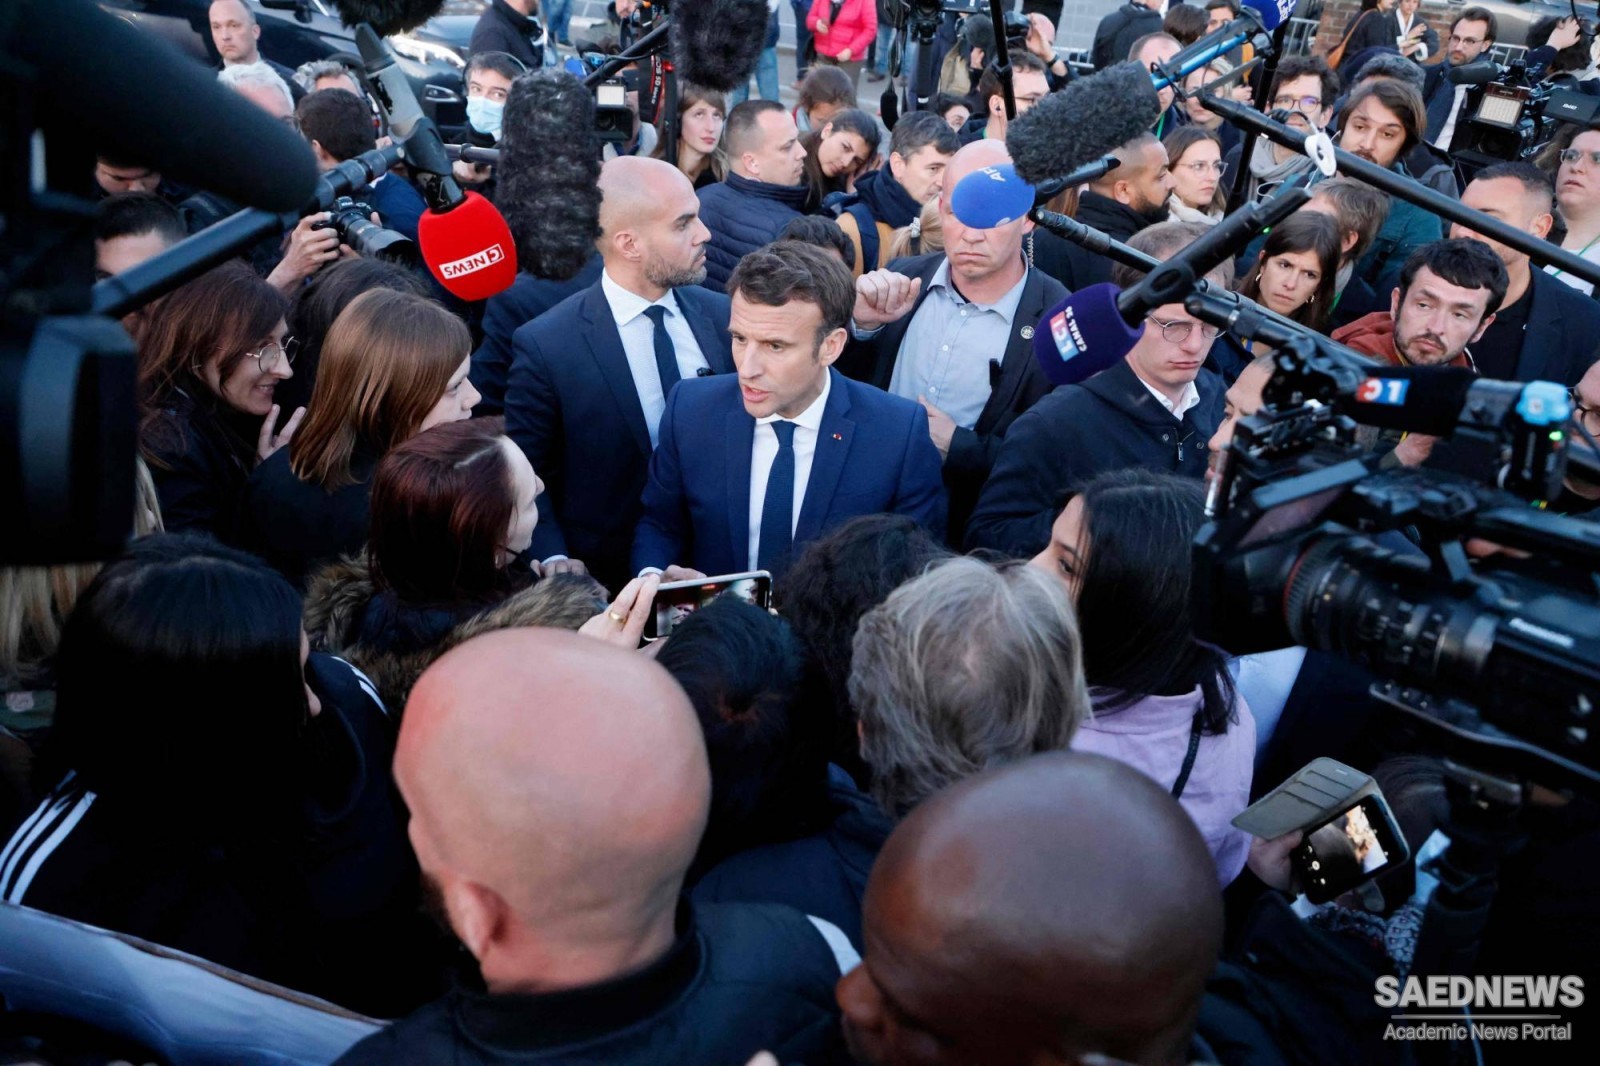 Macron faces angry voters as he campaigns against Le Pen